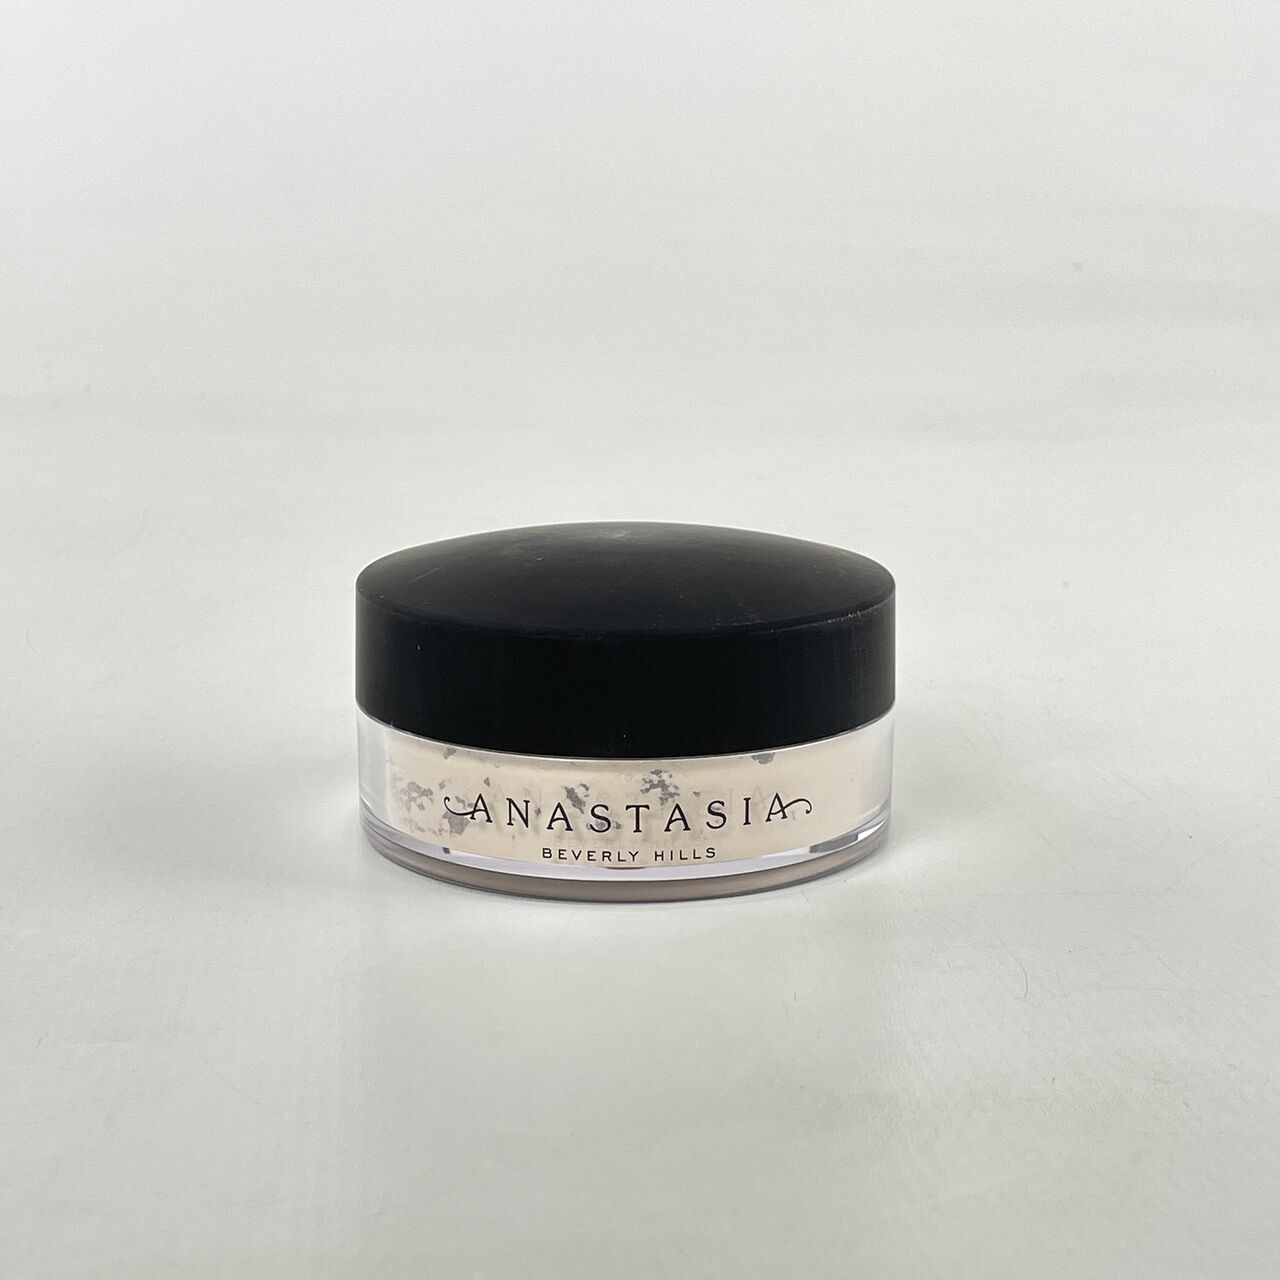 Anastasia Beverly Hills Loose Setting Powder Faces